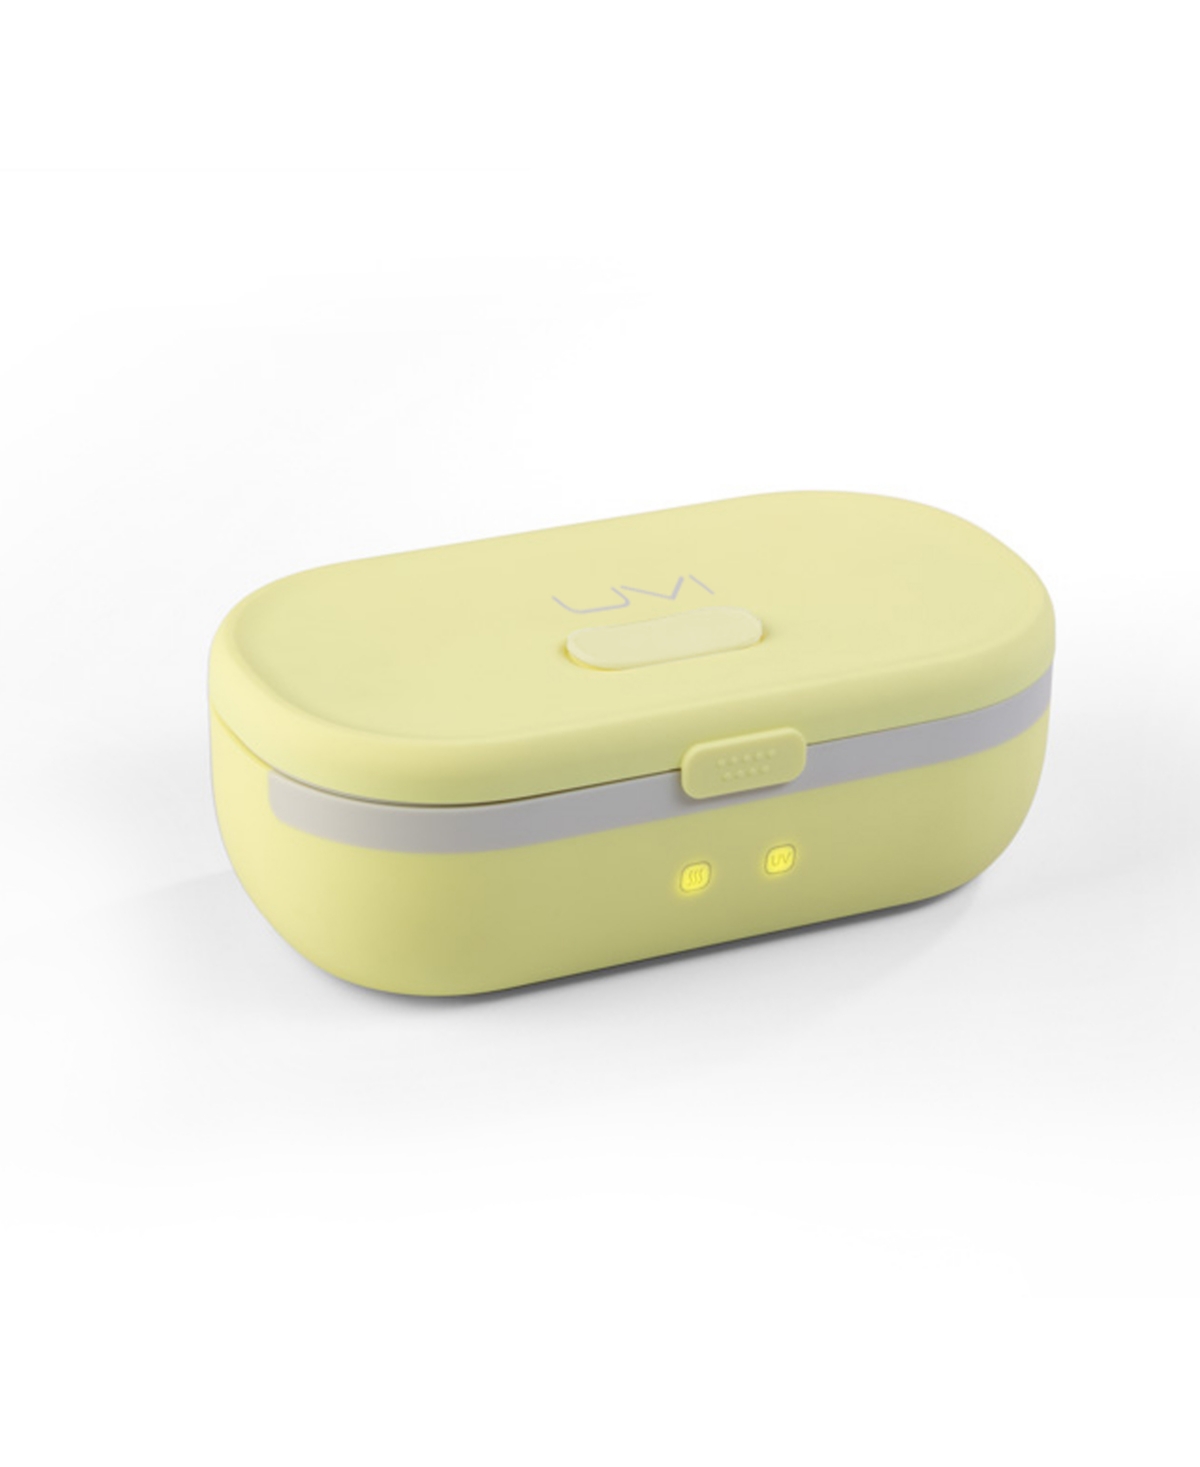 Uvi - The Self Heating Lunchbox With Ultraviolet Light For Sanitation In Sunshine